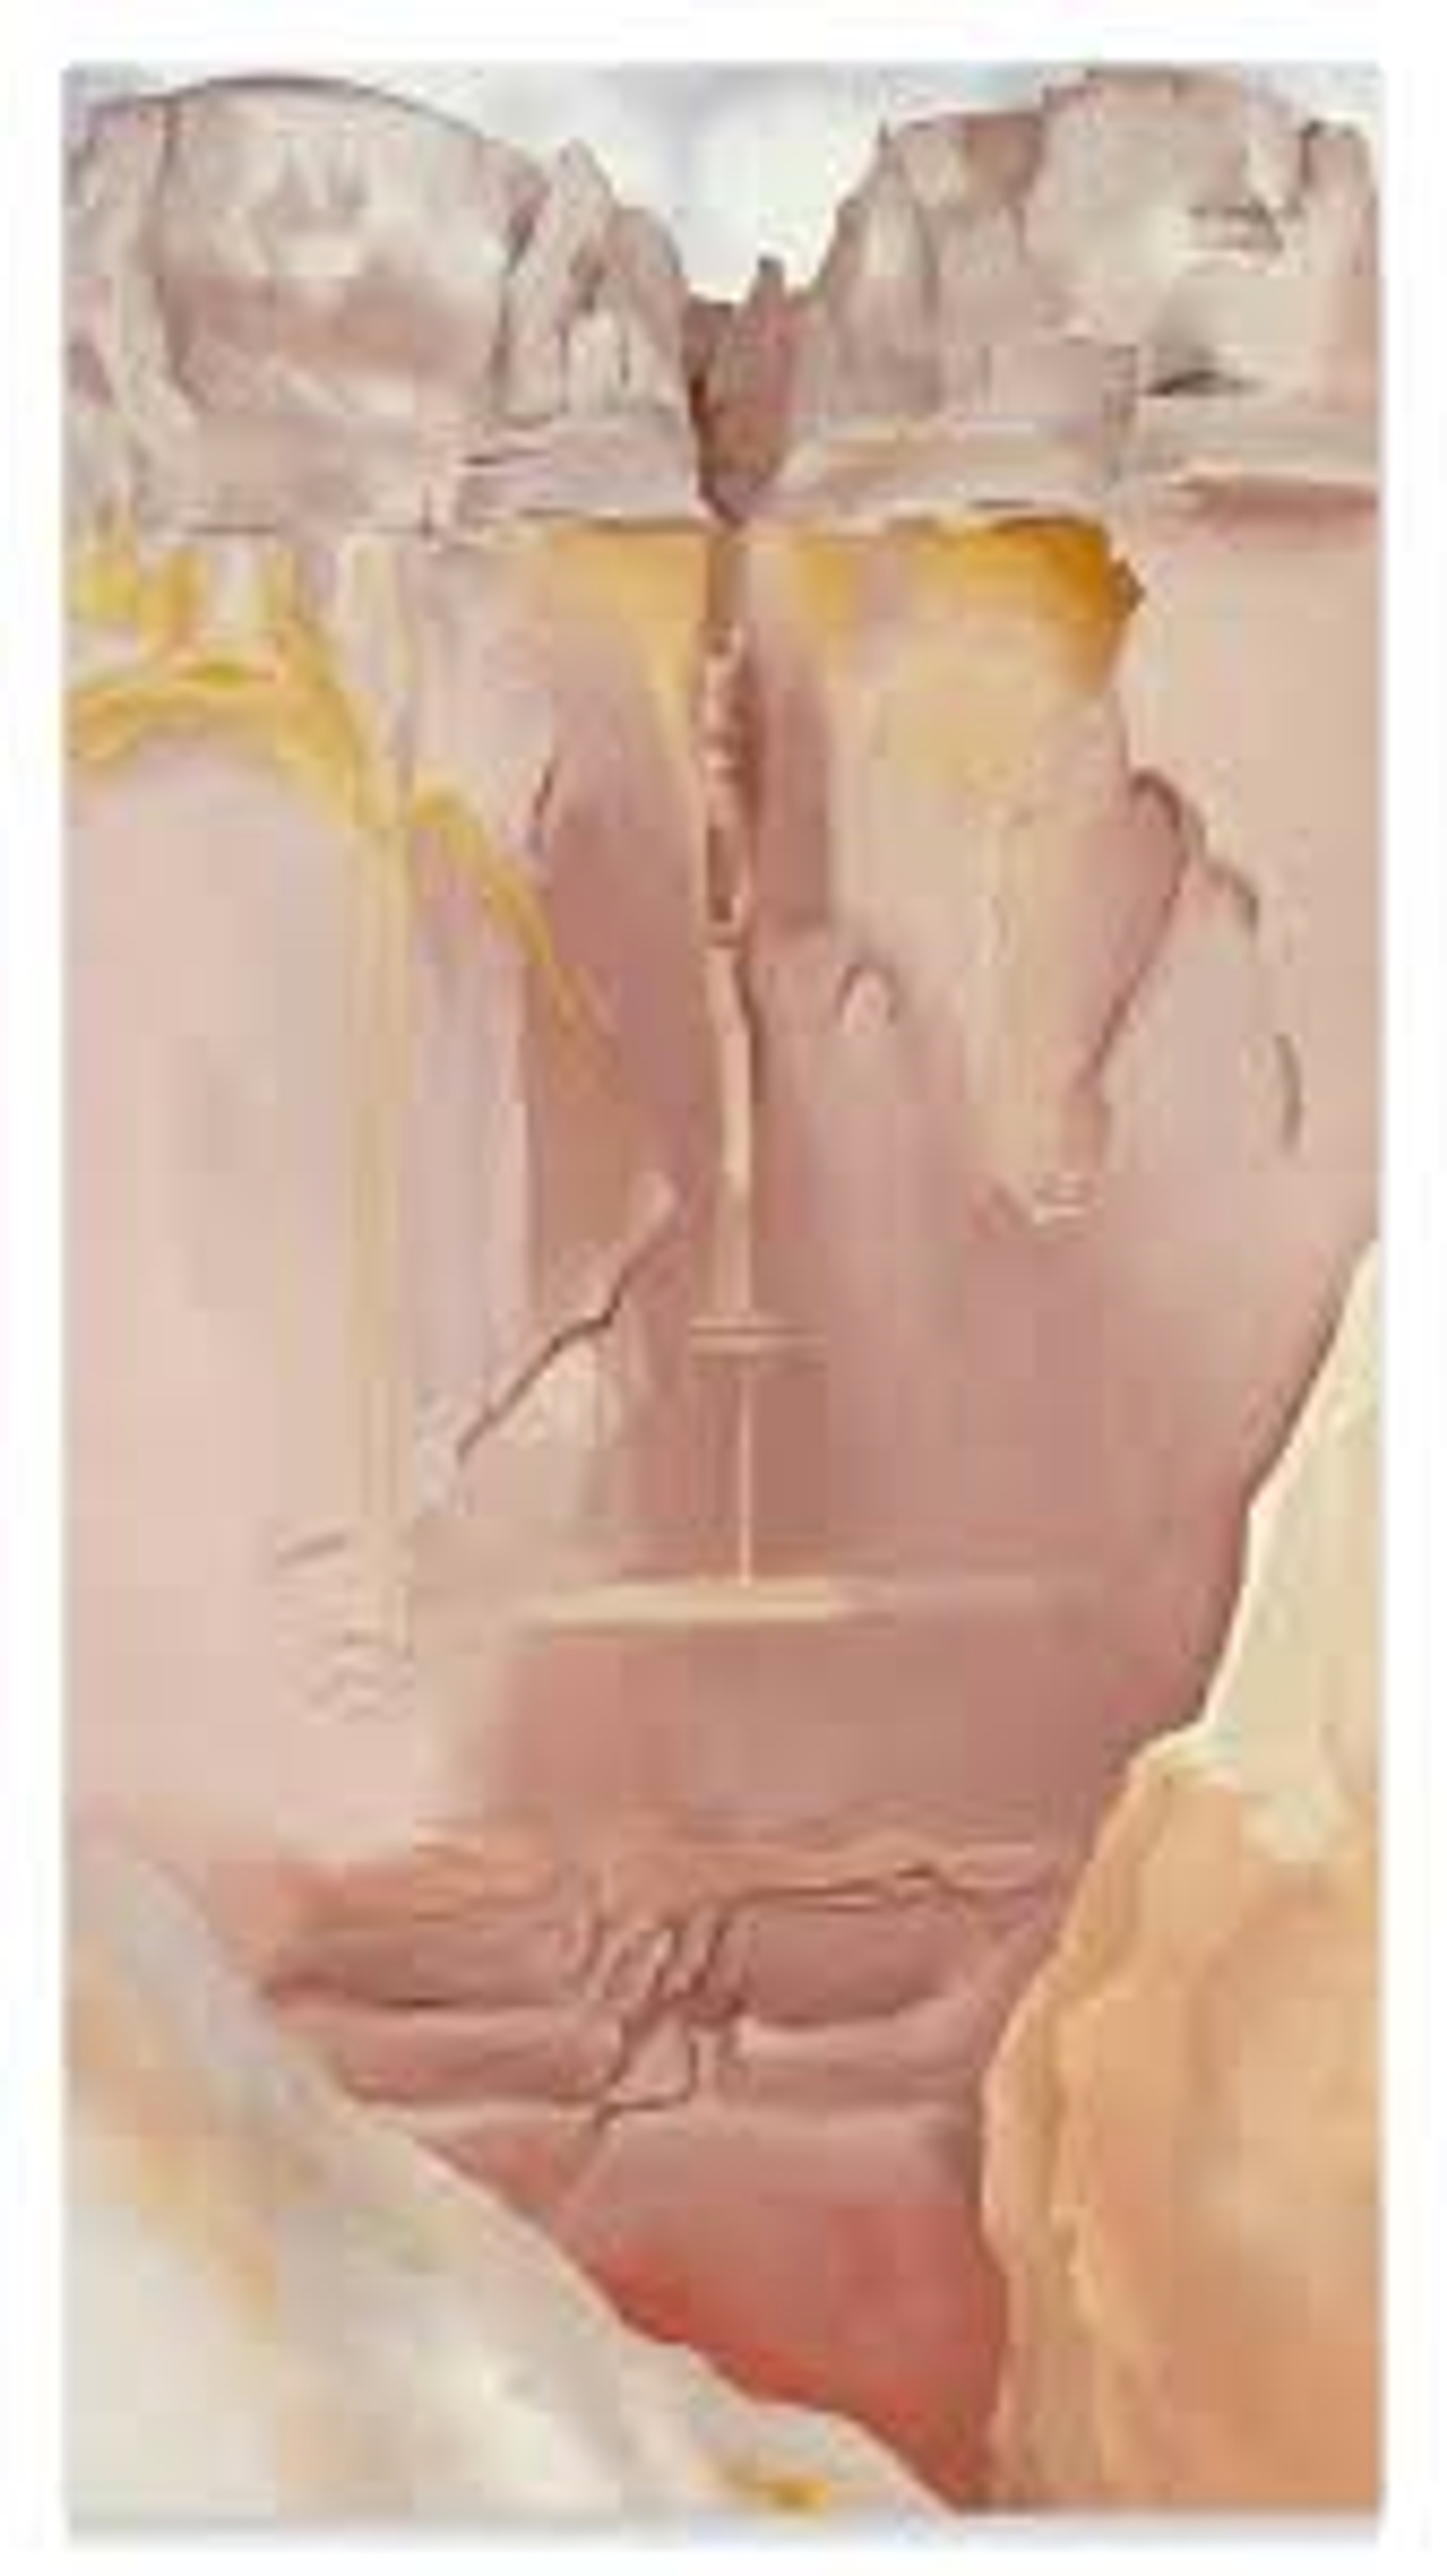 This painting depicts an arid landscape in tones of peach and pink, and shows a waterfall from which only a trickle of water emerges.